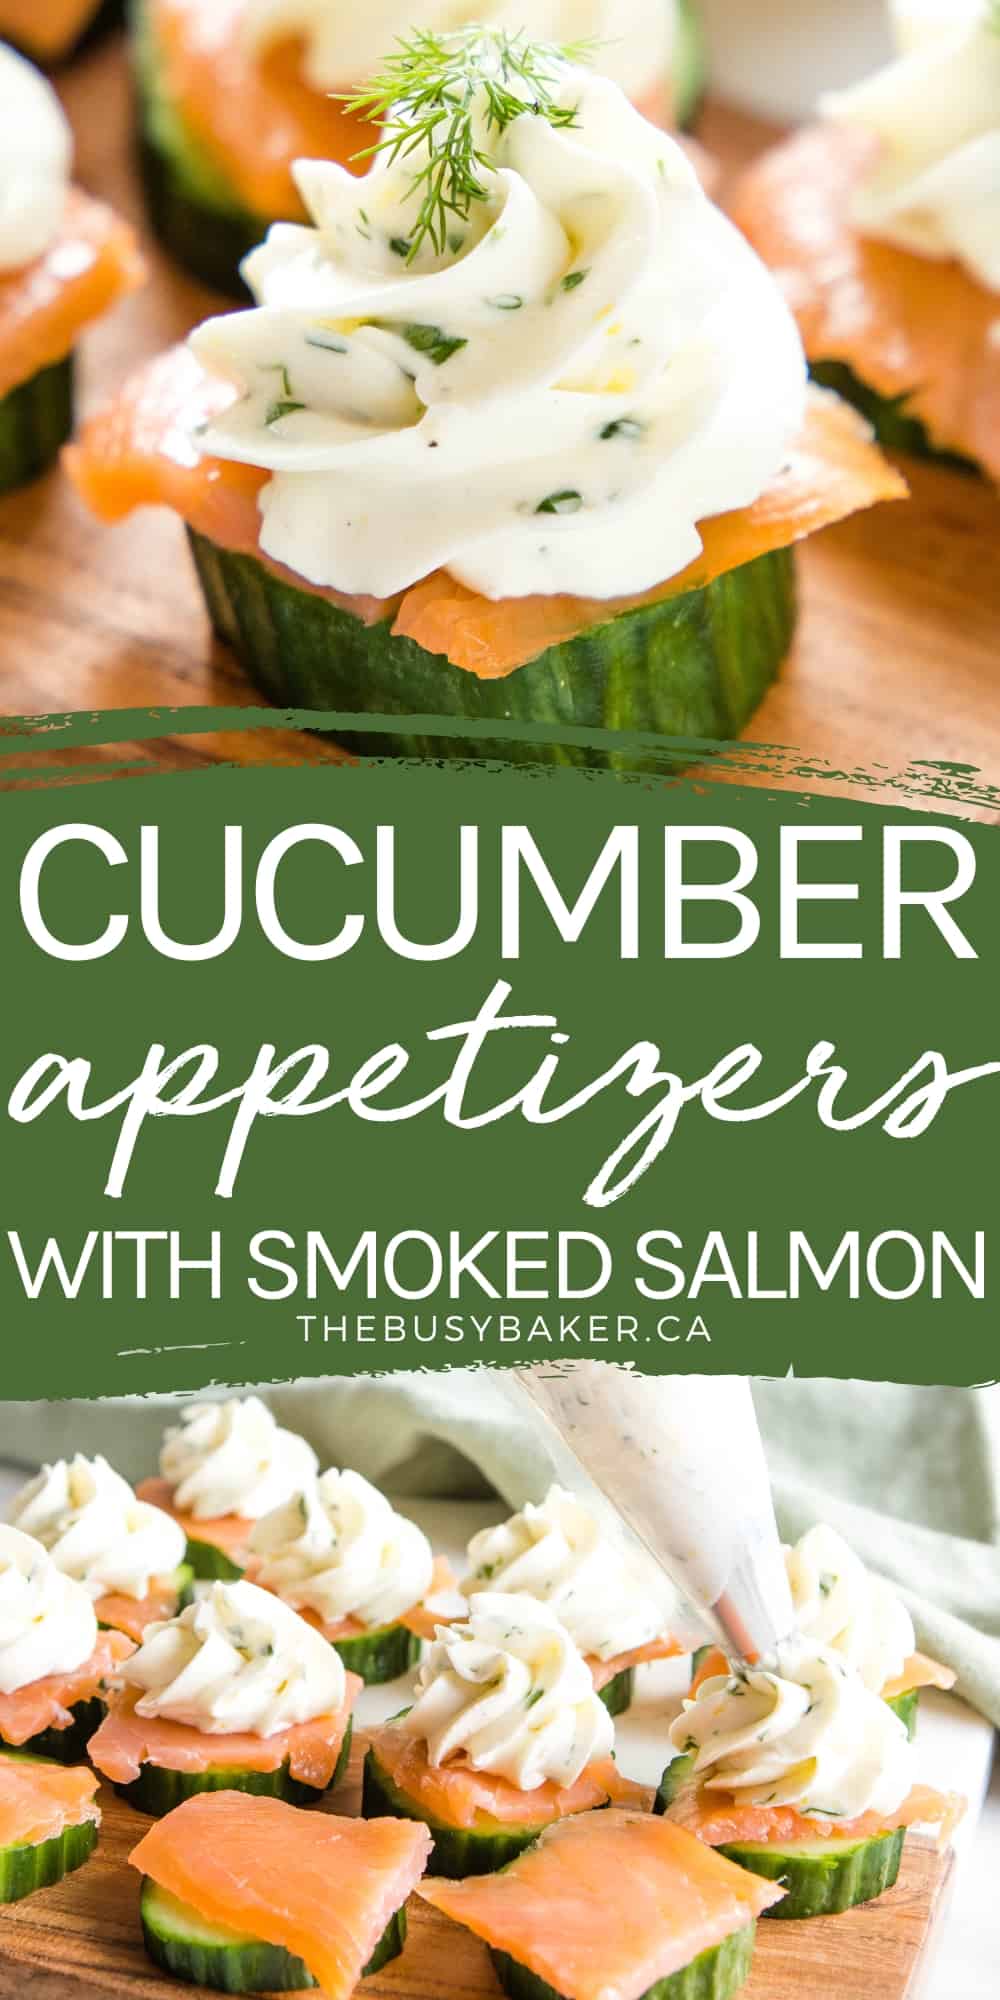 These Cucumber Appetizers with Smoked Salmon are the perfect light and healthy snack - low carb & flavoured with lemon and fresh herbs! Recipe from thebusybaker.ca! #cucumberappetizers #lowcarb #healthy #holidayappetizer #cheese #glutenfreeappetizer #lowcarbappetizer #keto via @busybakerblog